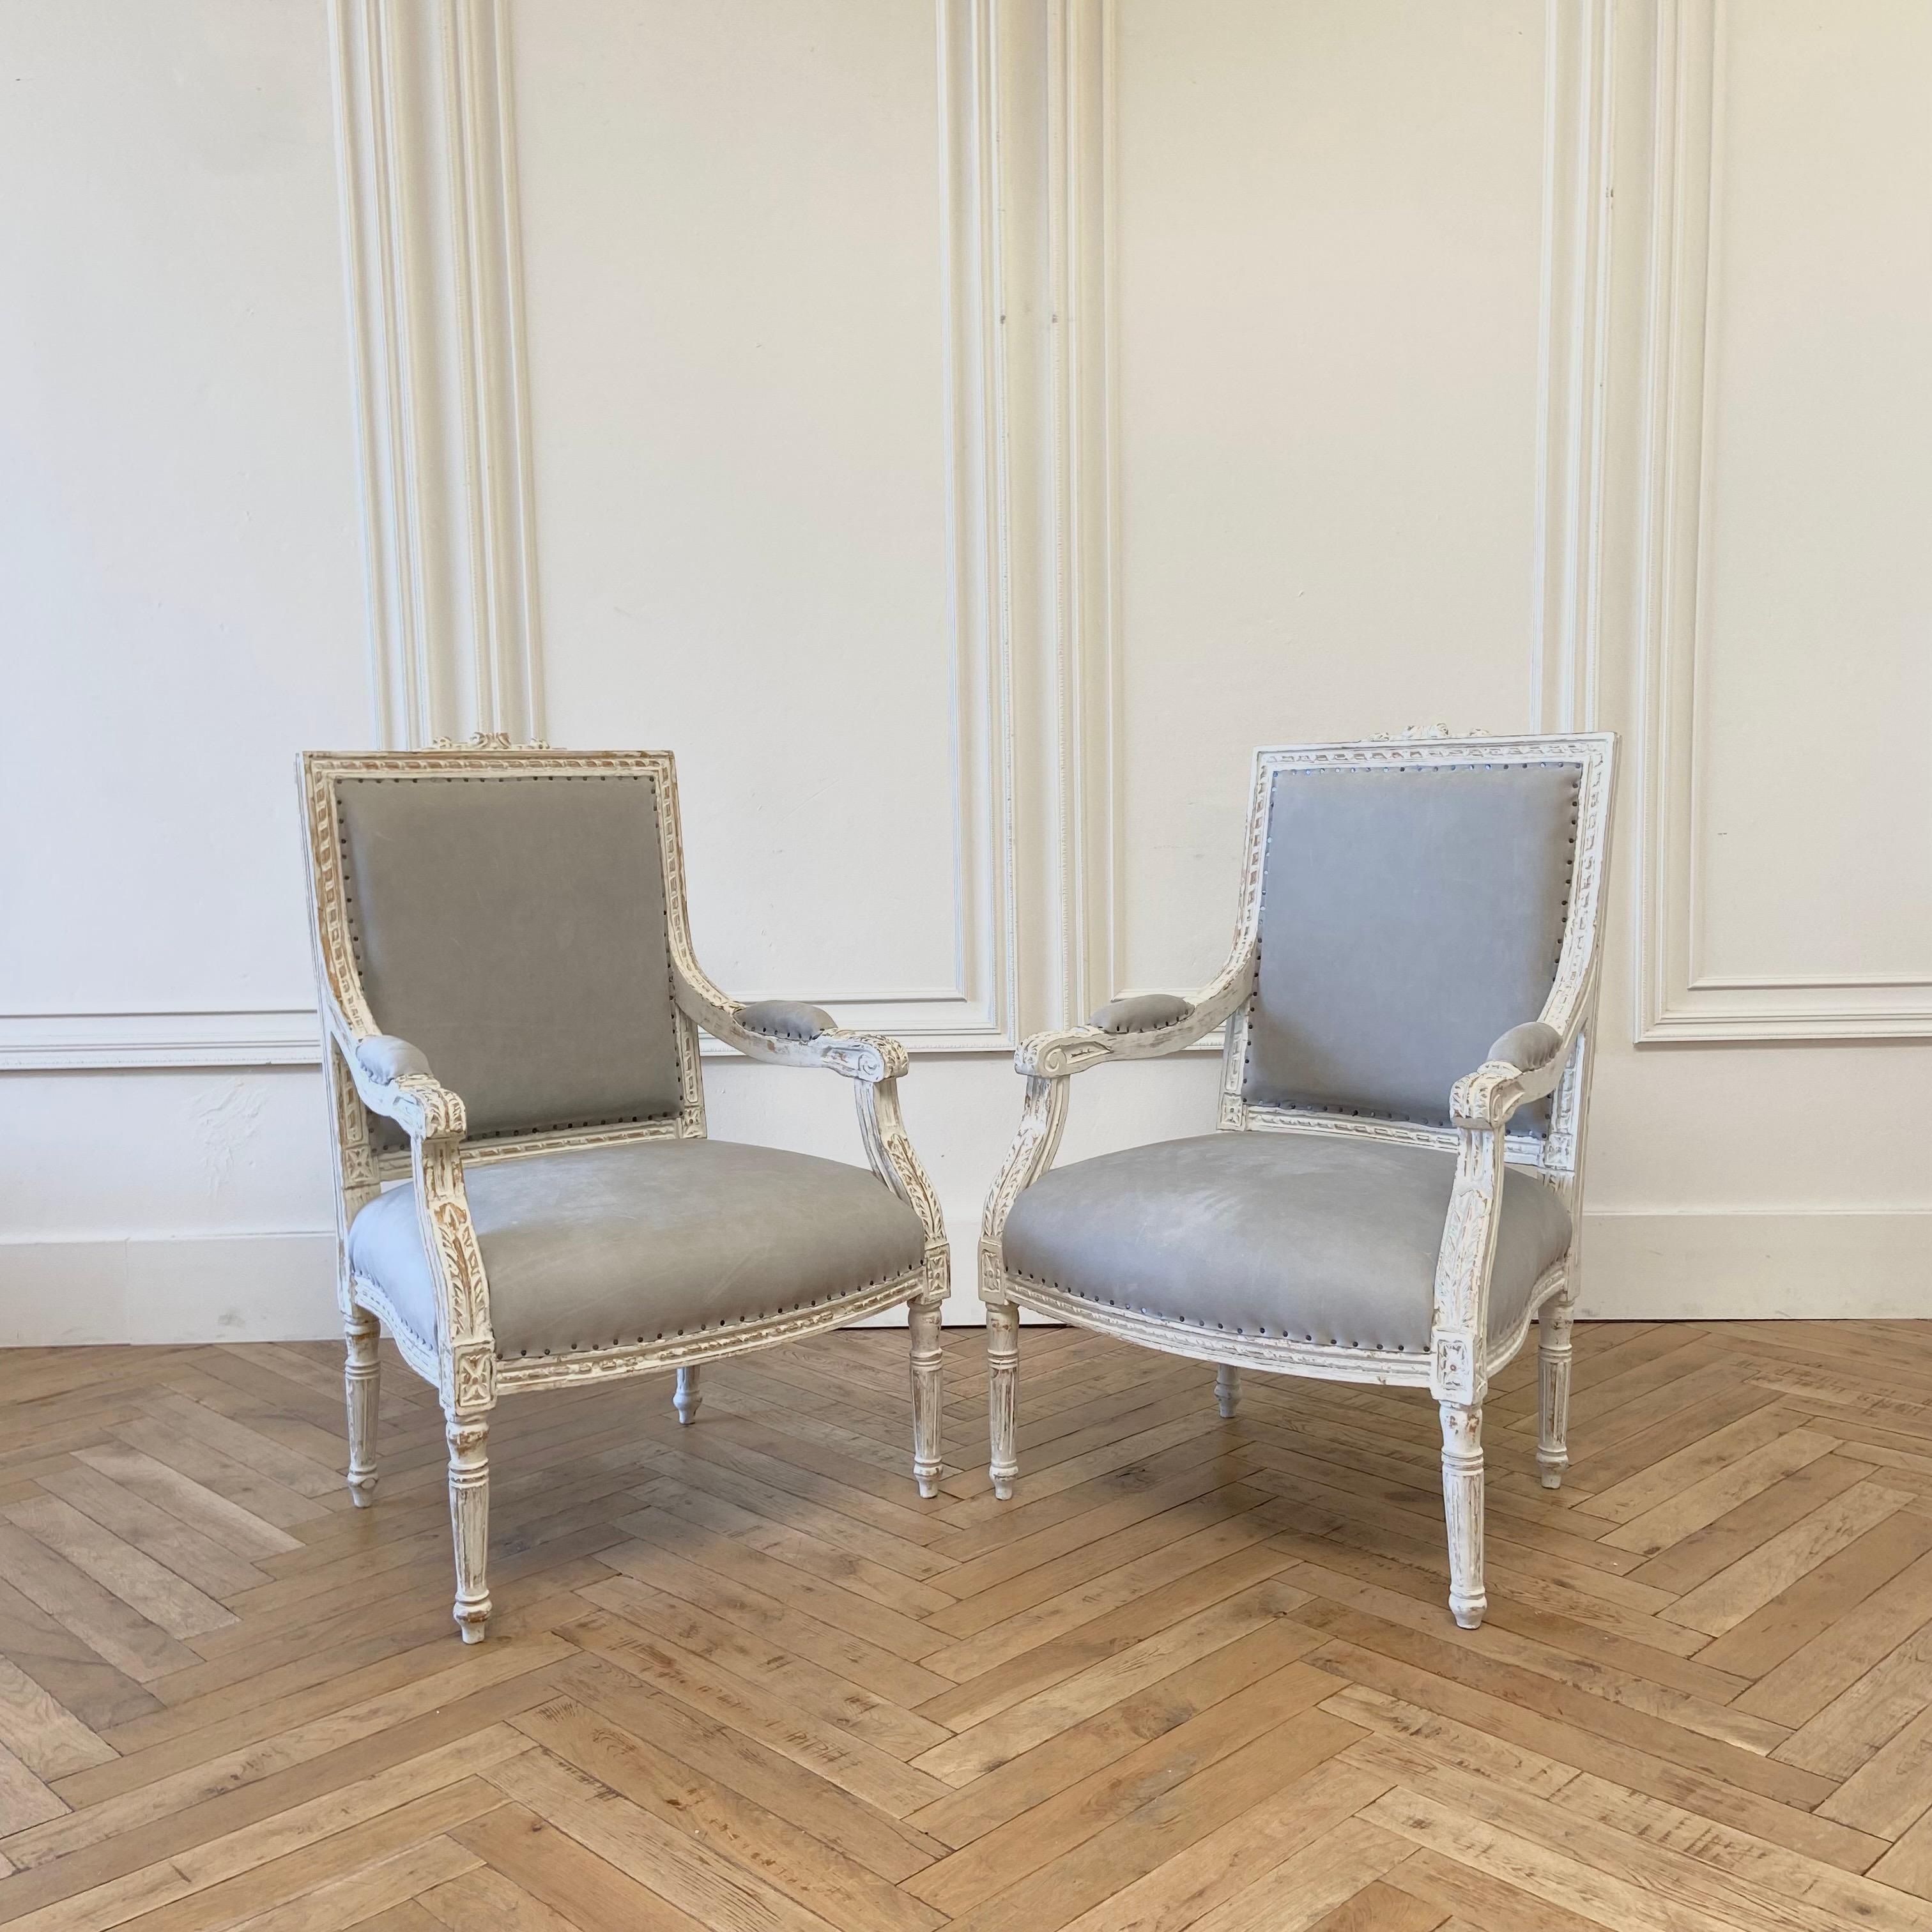 Vintage pair of leather chairs
Louis XVI style
Painted in an antique white finish with subtle gray tones.
Reupholstered in a soft ocean Gray sueded leather, and finished with antique nail head trim.
Solid and sturdy ready for everyday